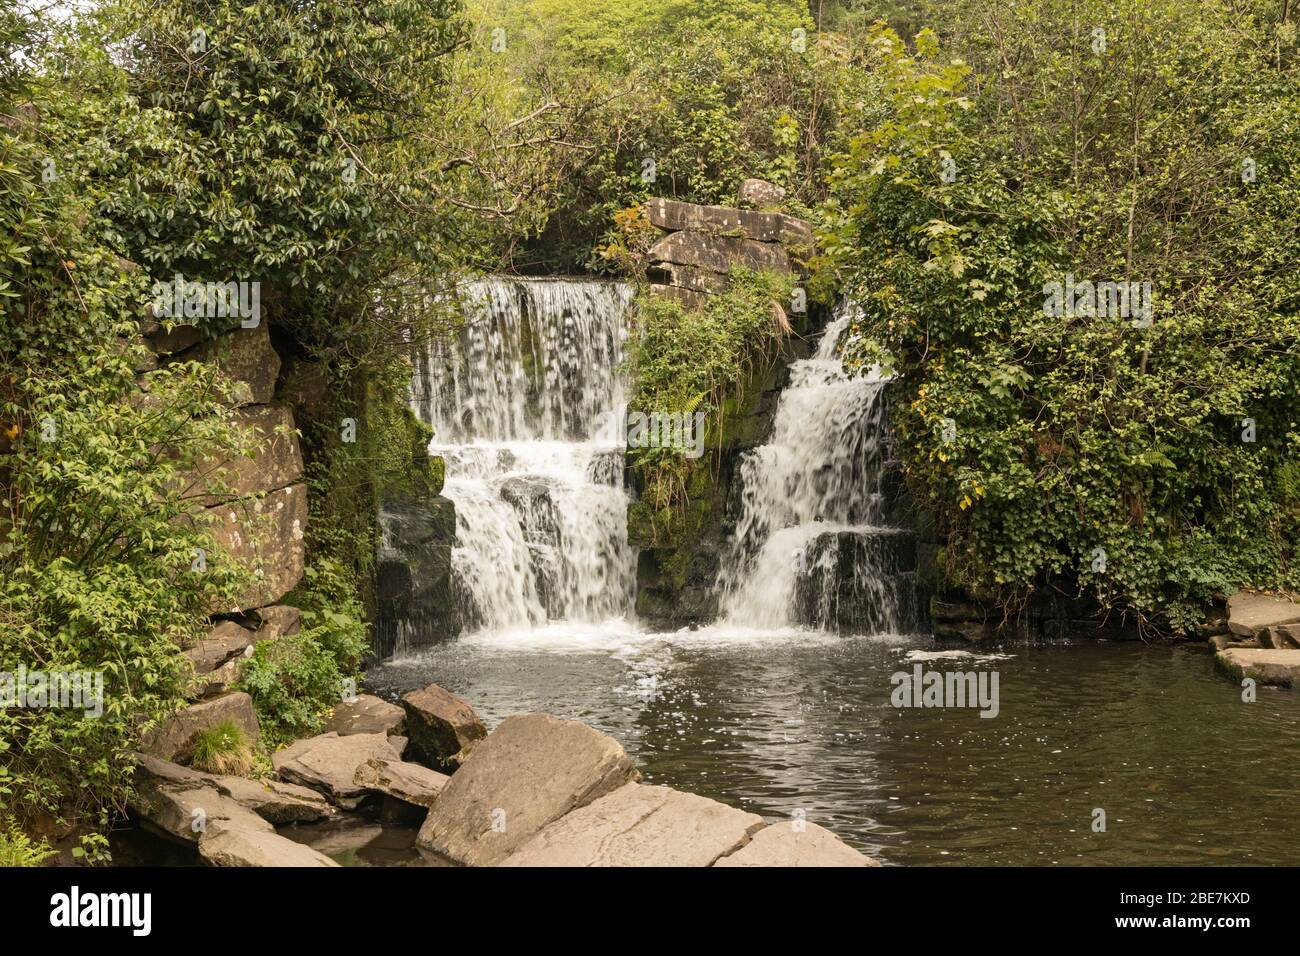 Waterfall on River Llan, Penllergare Valley Woods, Penllergaer, Swansea, South Wales, UK Stock Photo